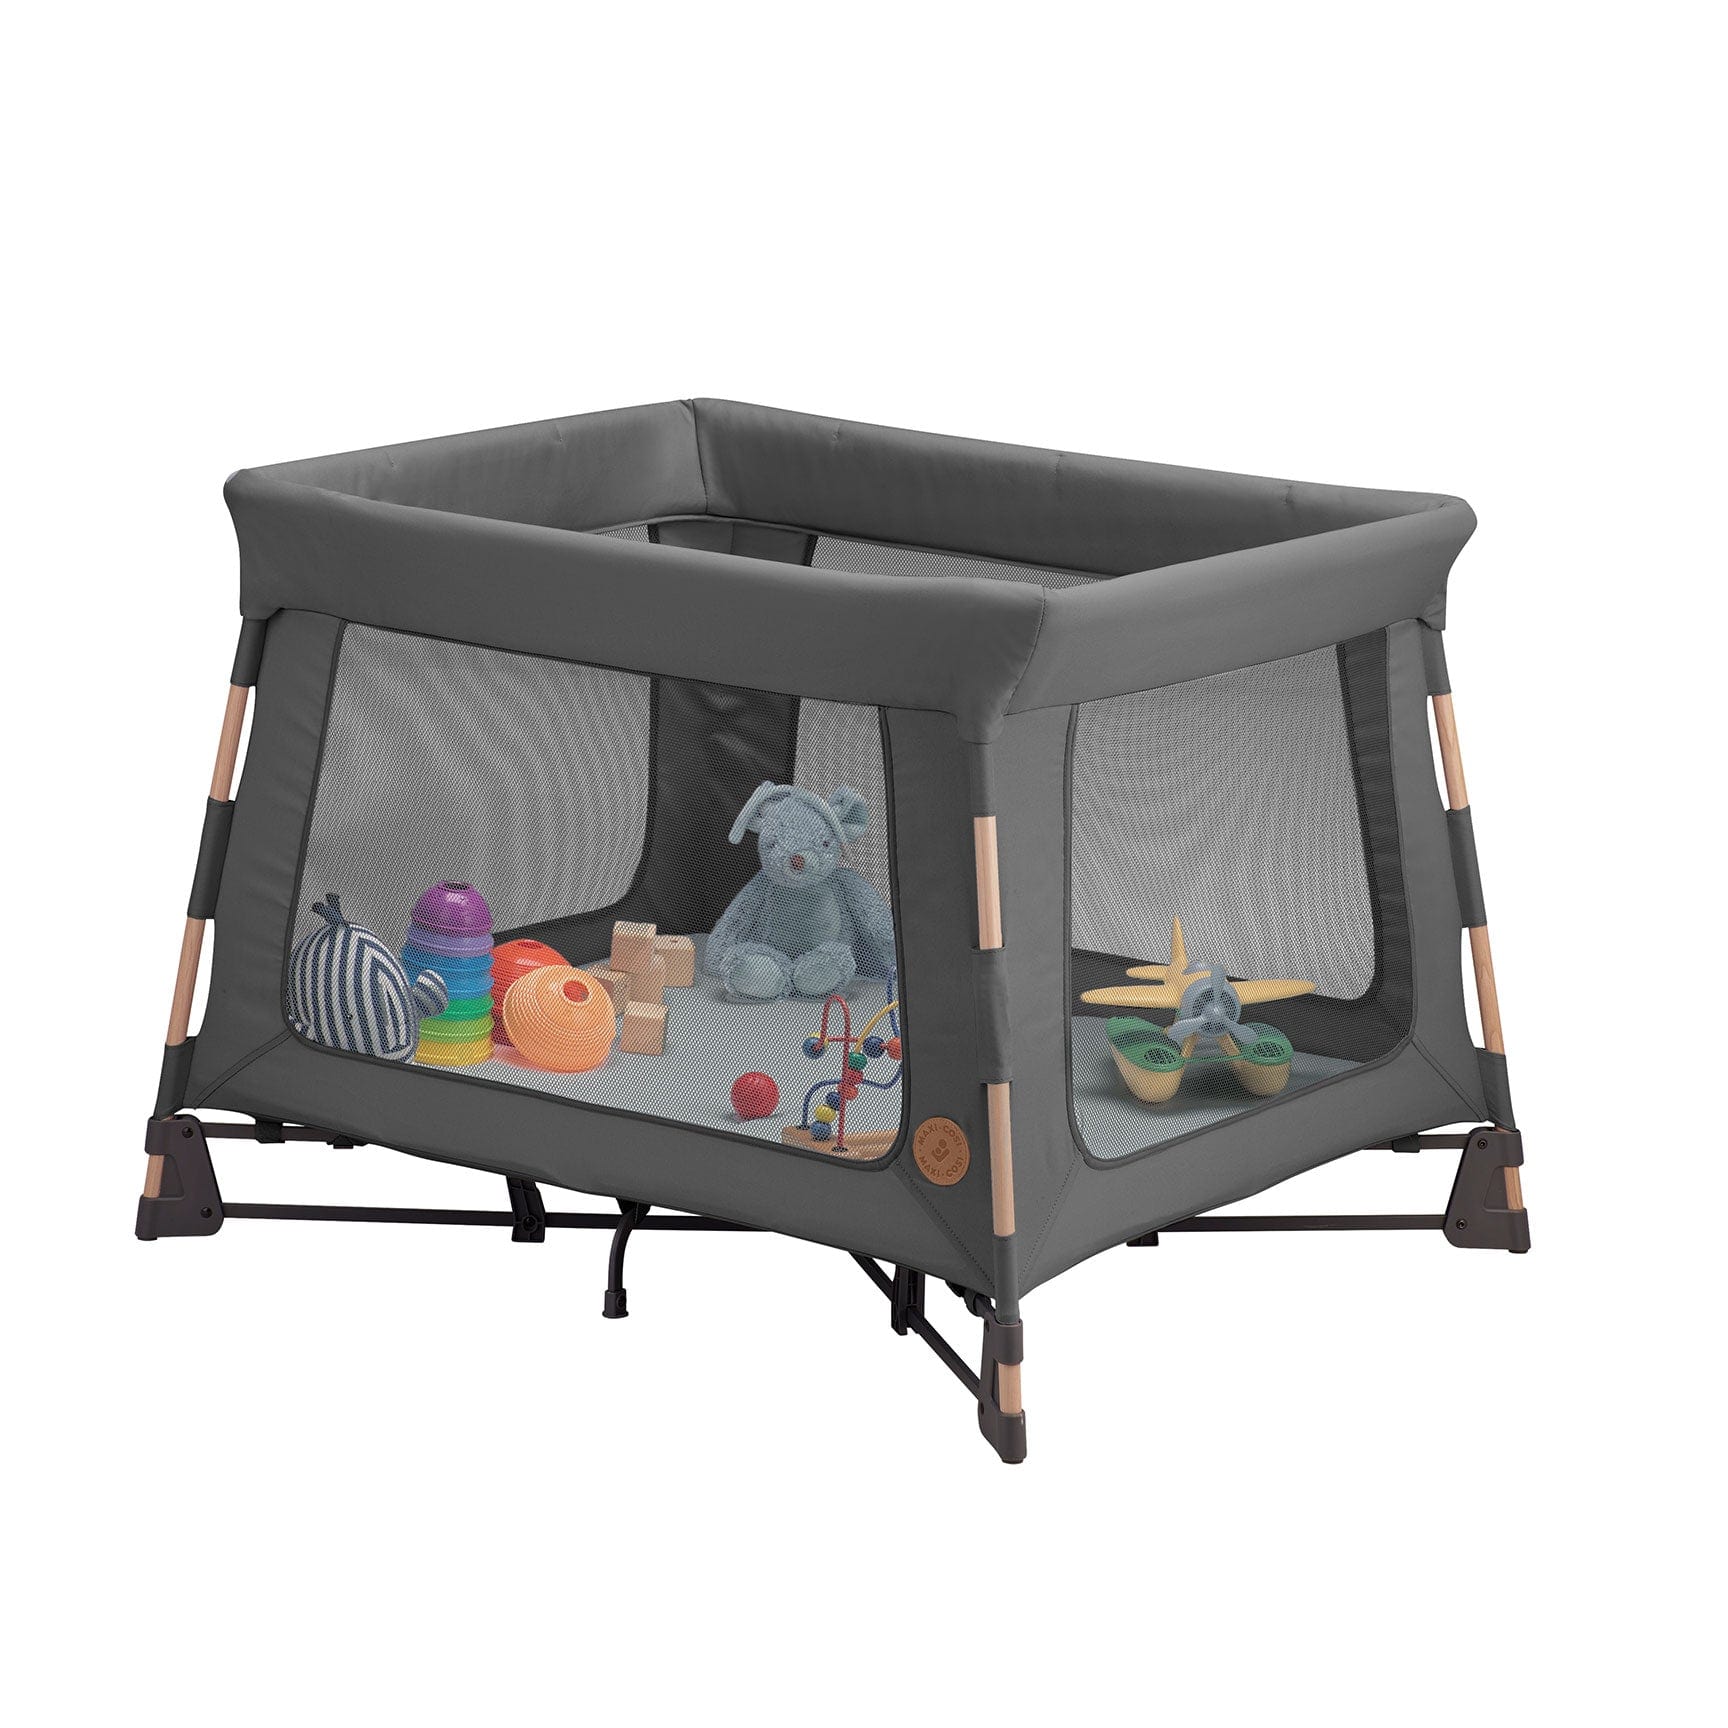 Maxi-Cosi Swift Playard in Beyond Graphite Travel Cots 2008043300 3220660330942